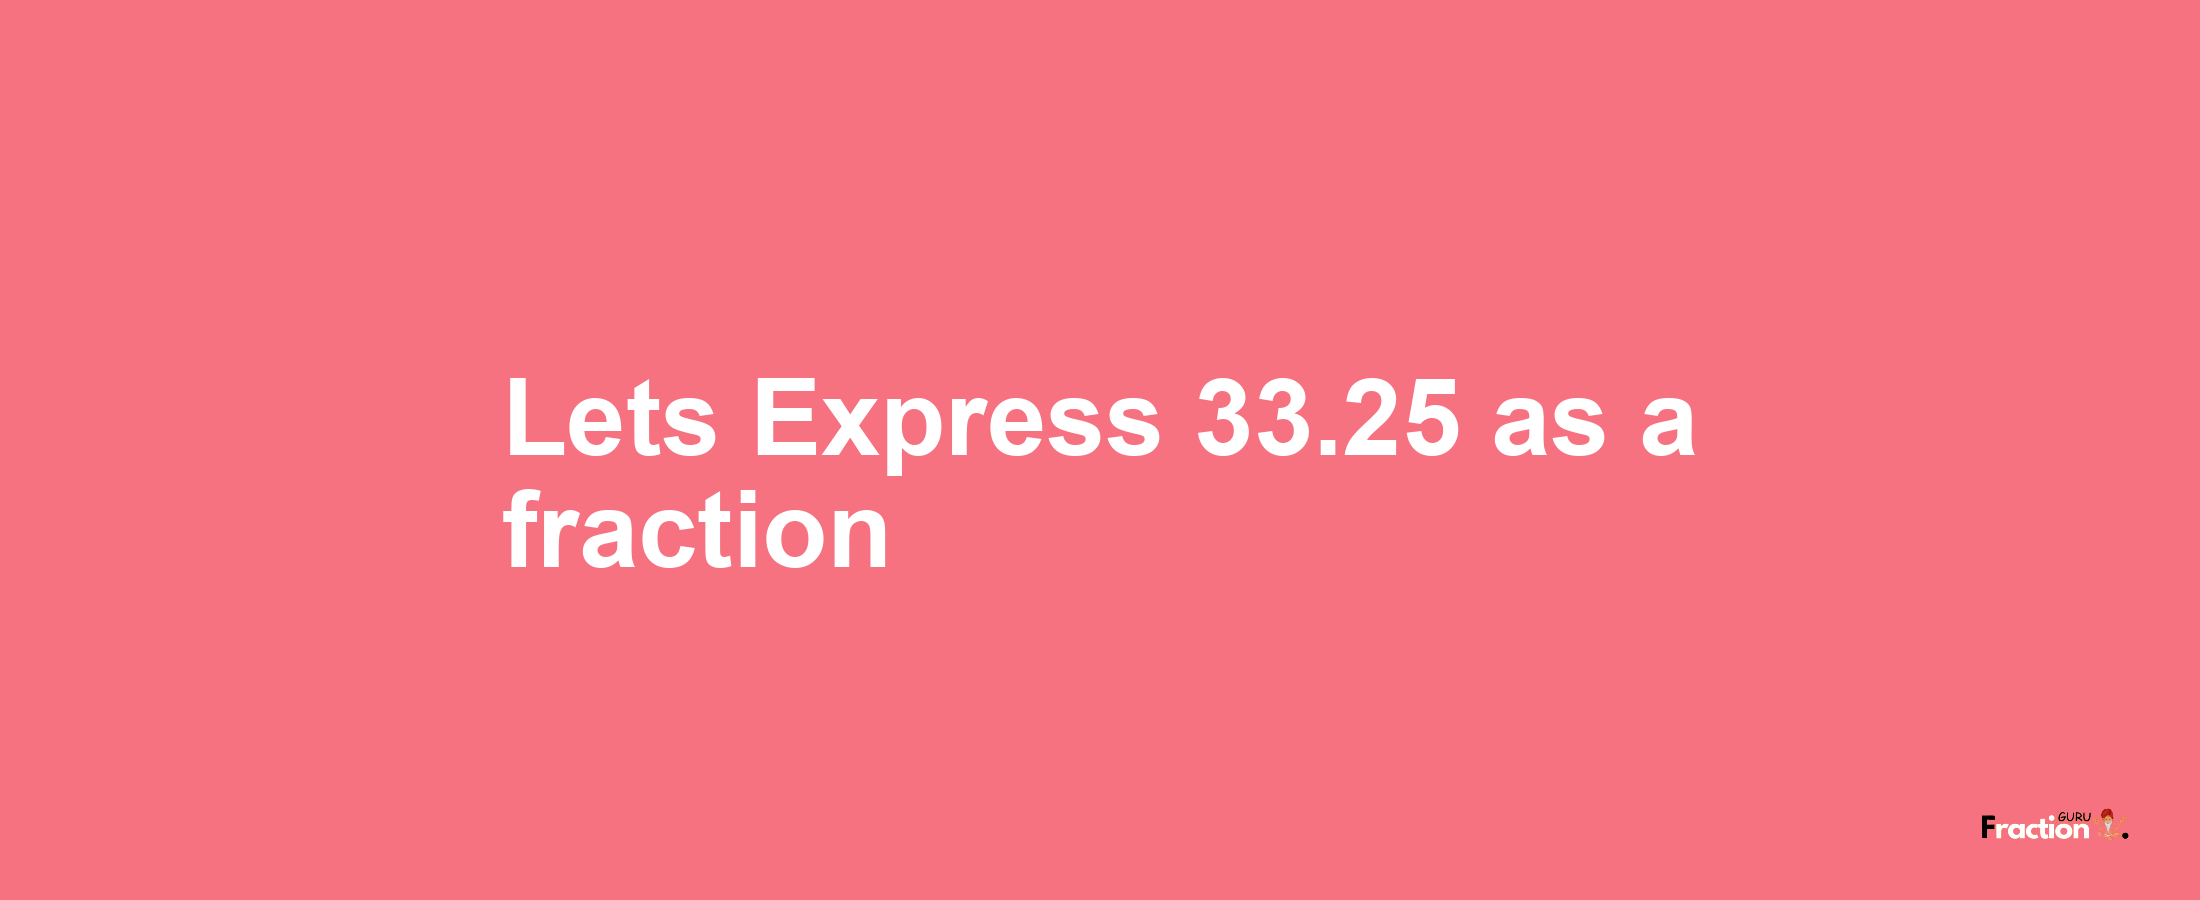 Lets Express 33.25 as afraction